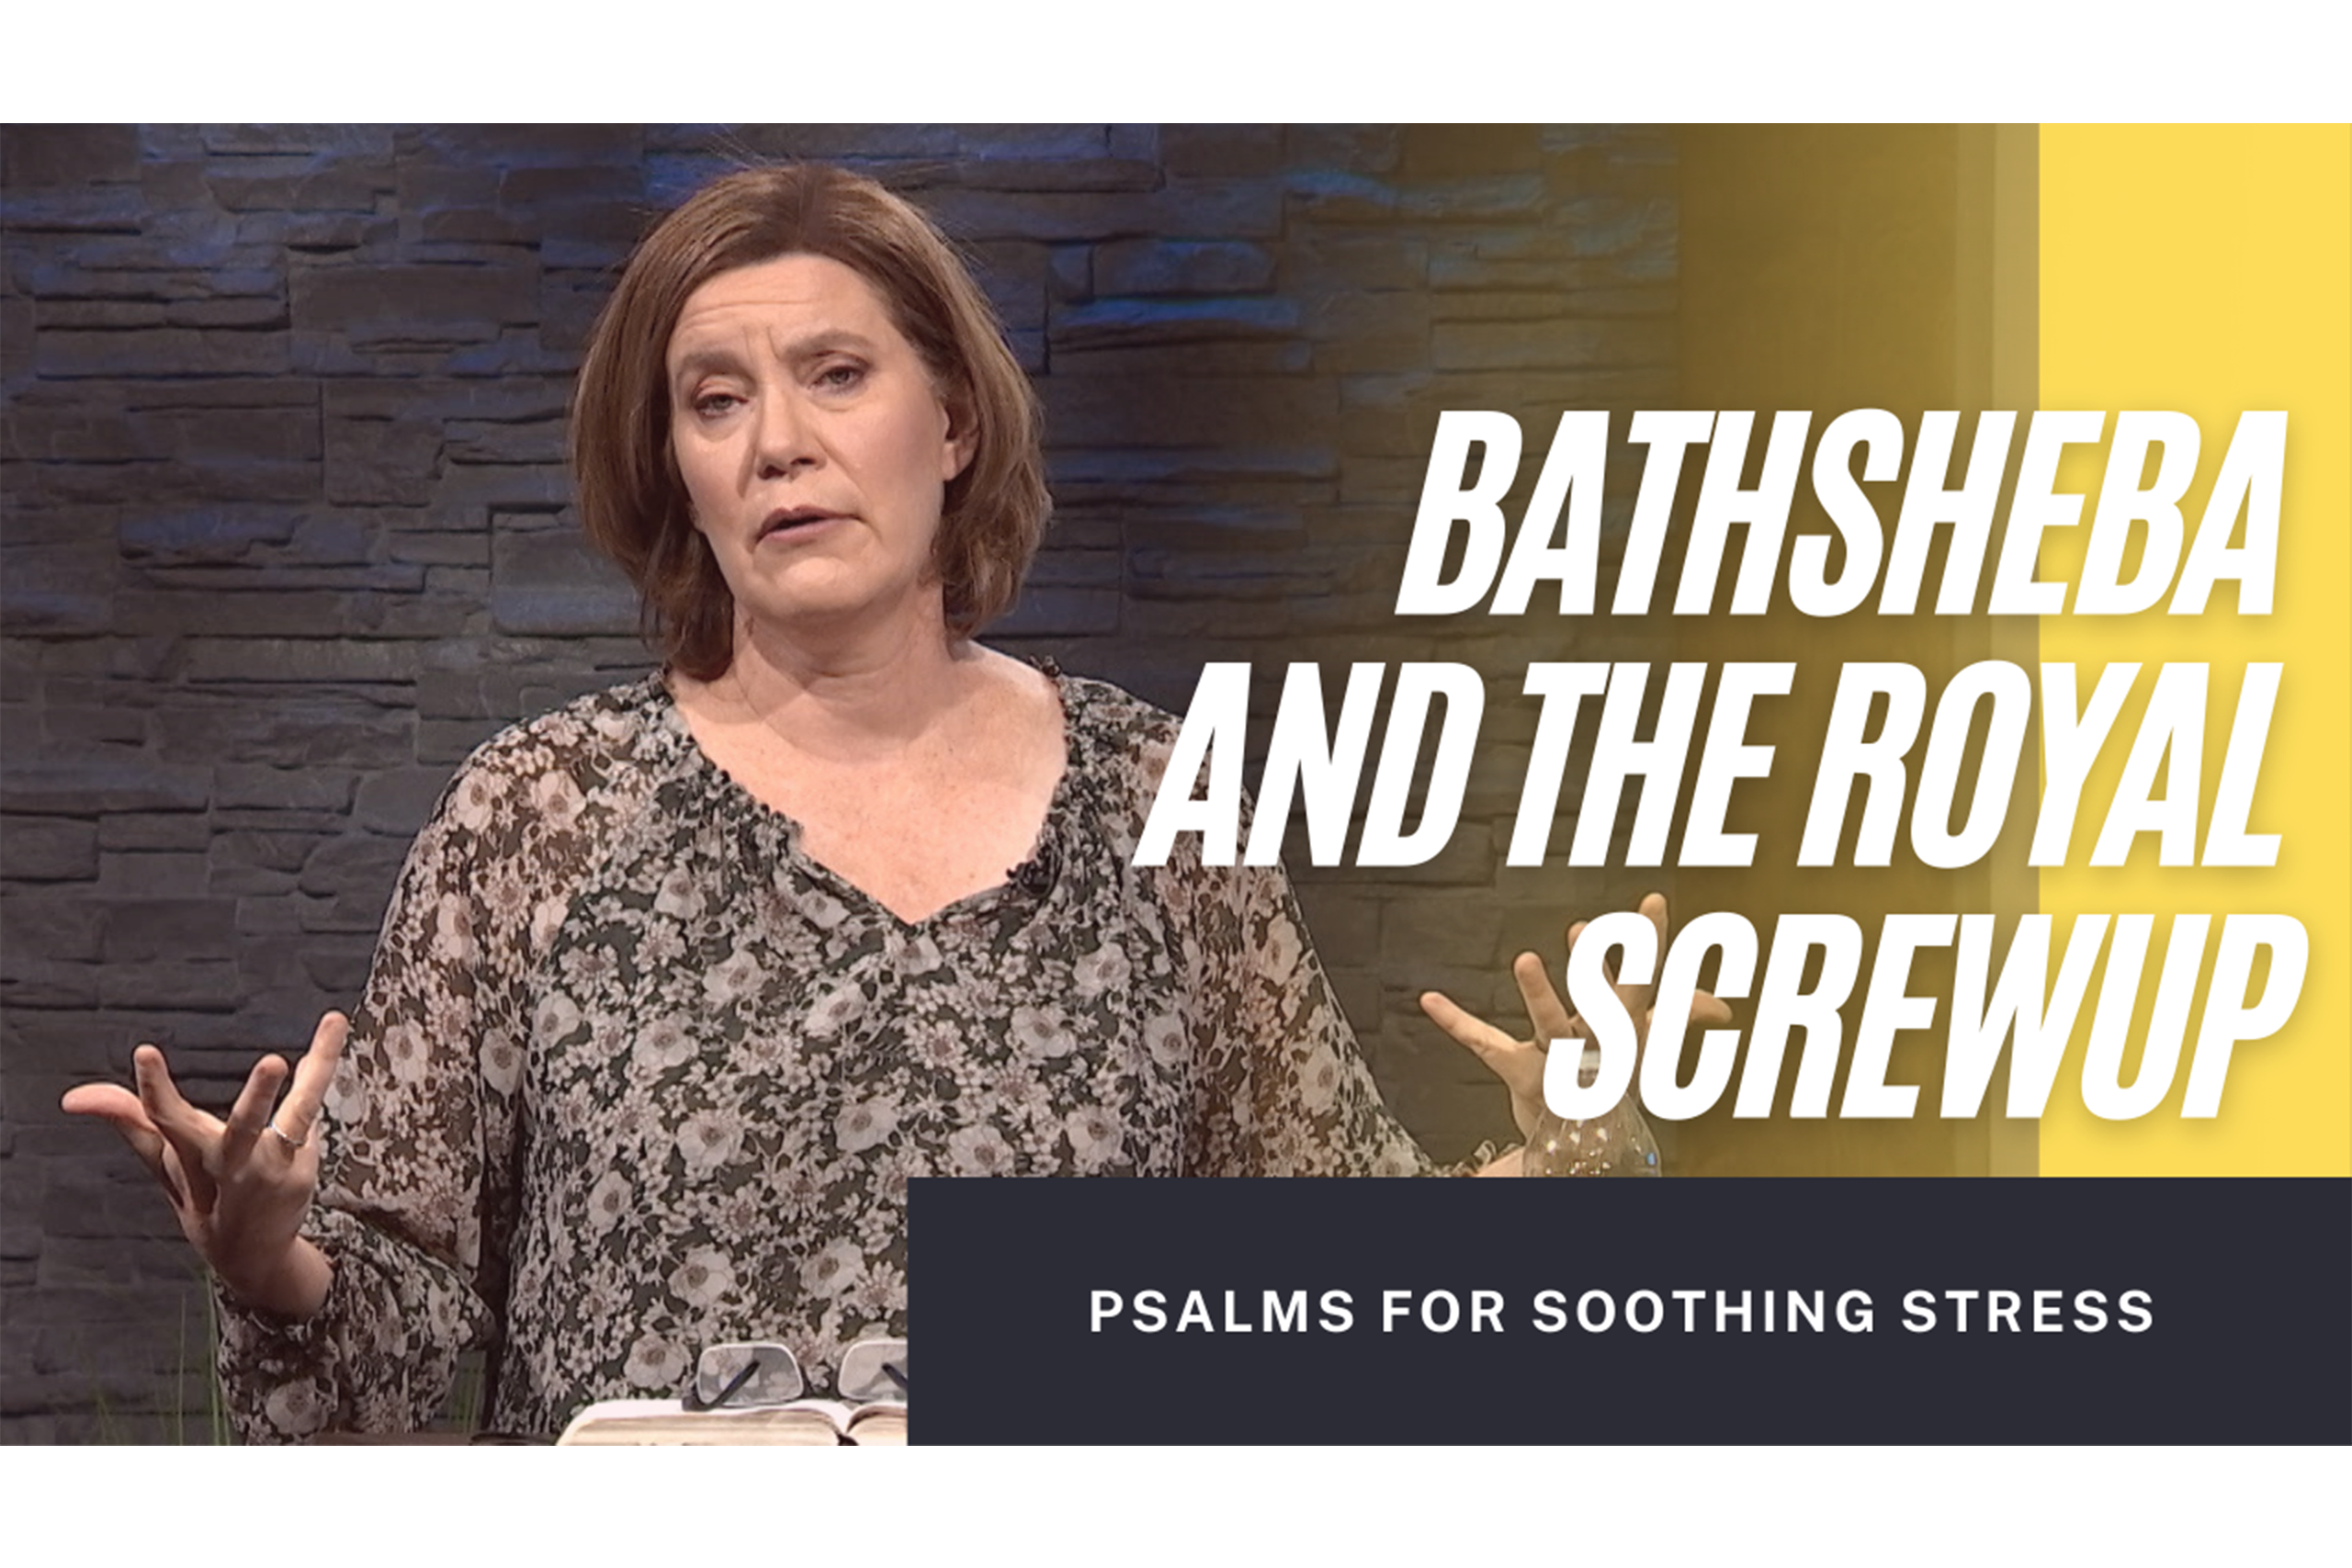 Psalms for Soothing Stress 3_Bathsheba and The Royal Screwup_THUMB